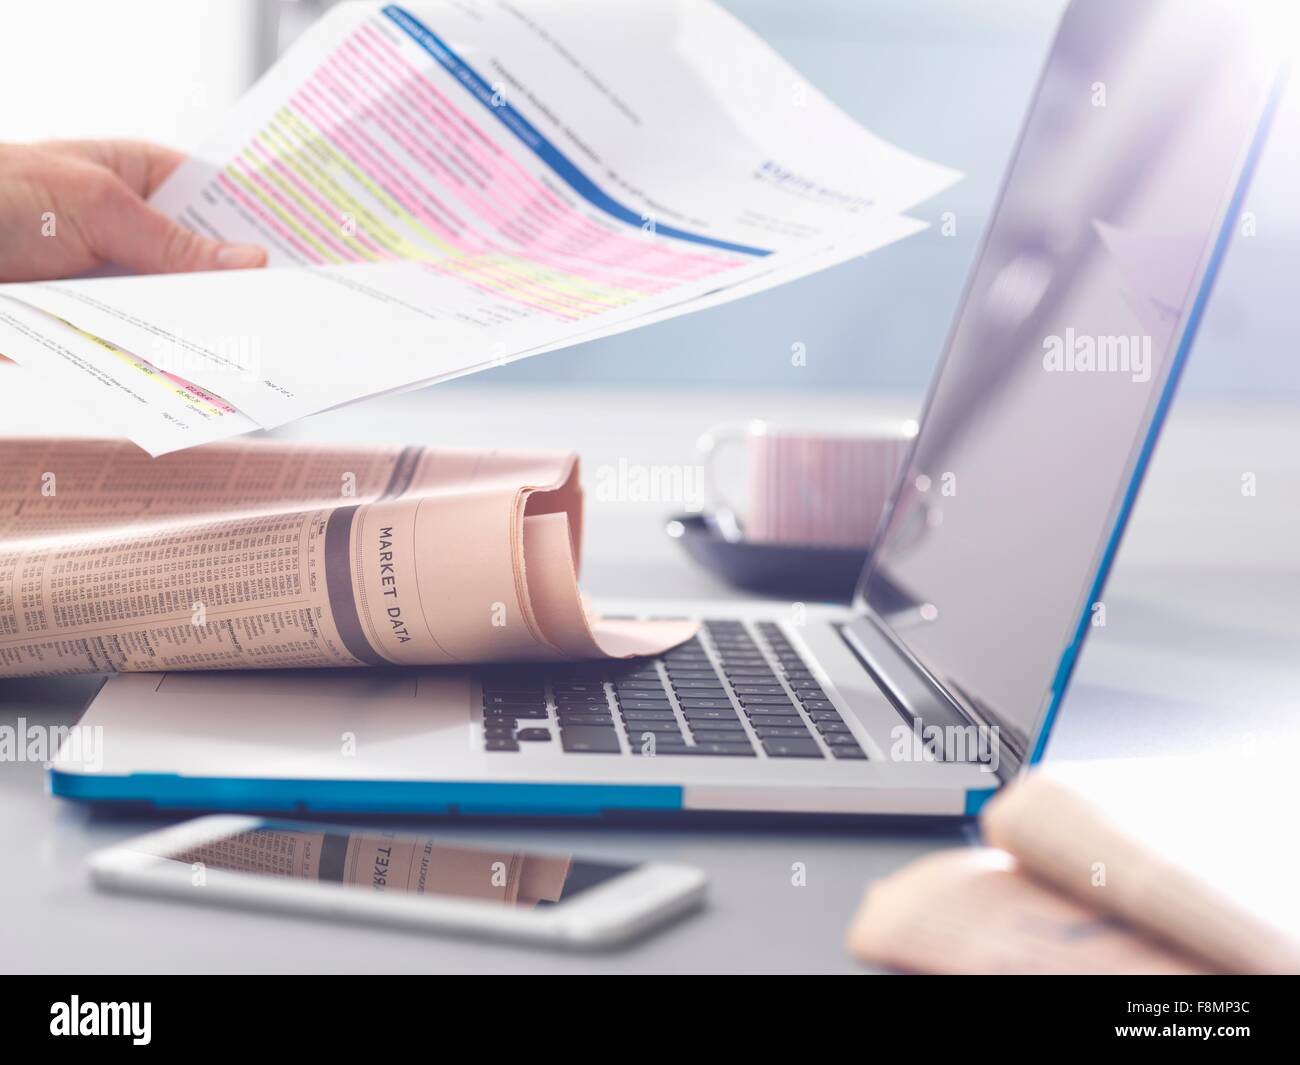 Man reviewing financial affairs using newspaper market data, investment statement and laptop Stock Photo